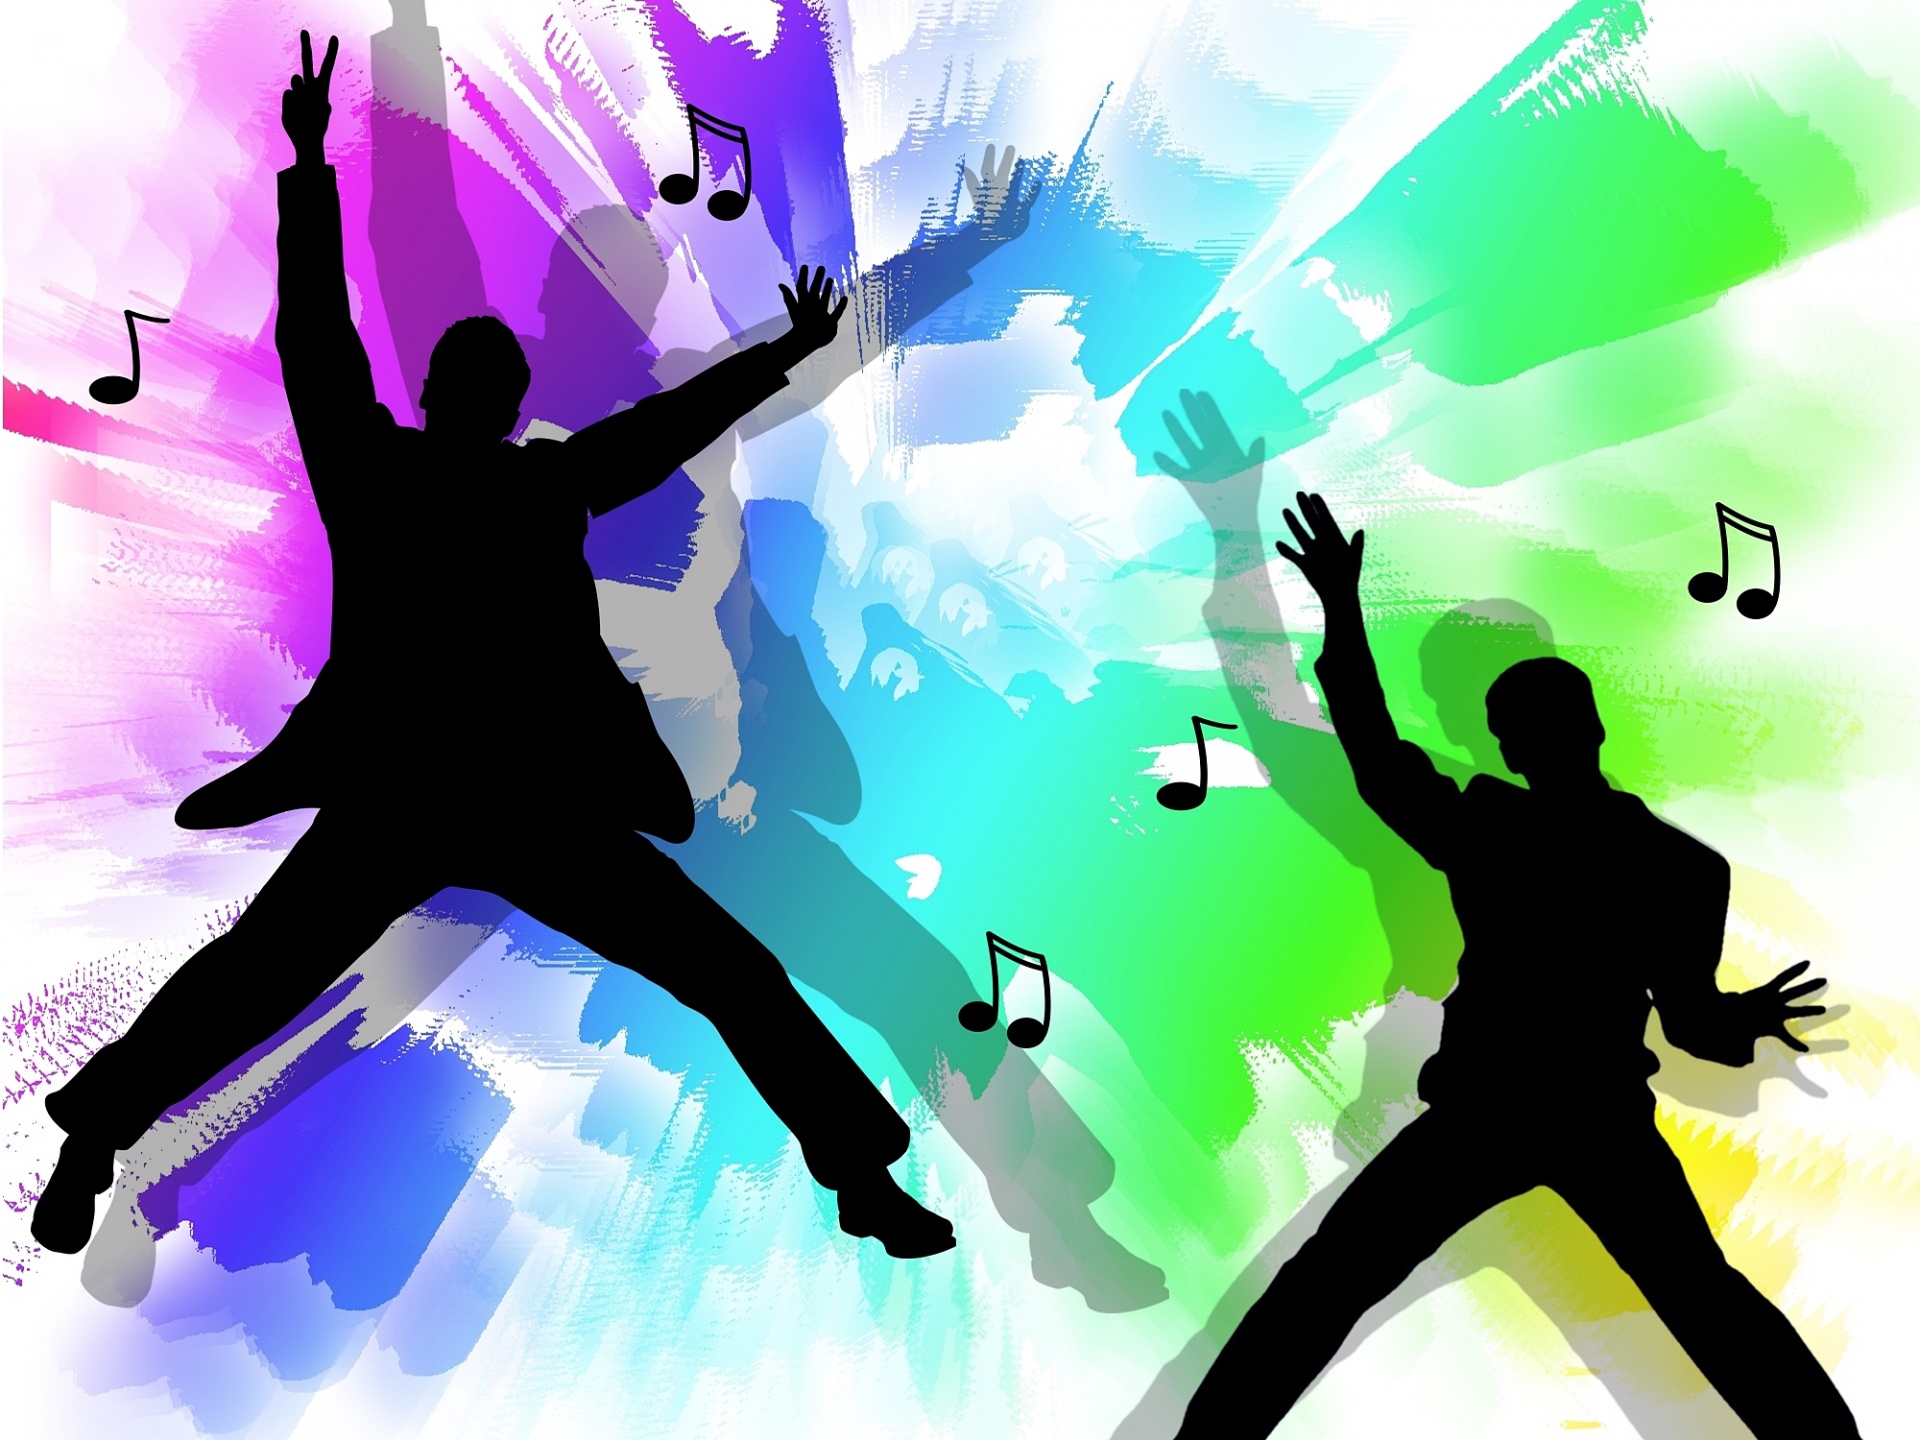 Download free photo of Background,dancing,celebration,fun,music - from  